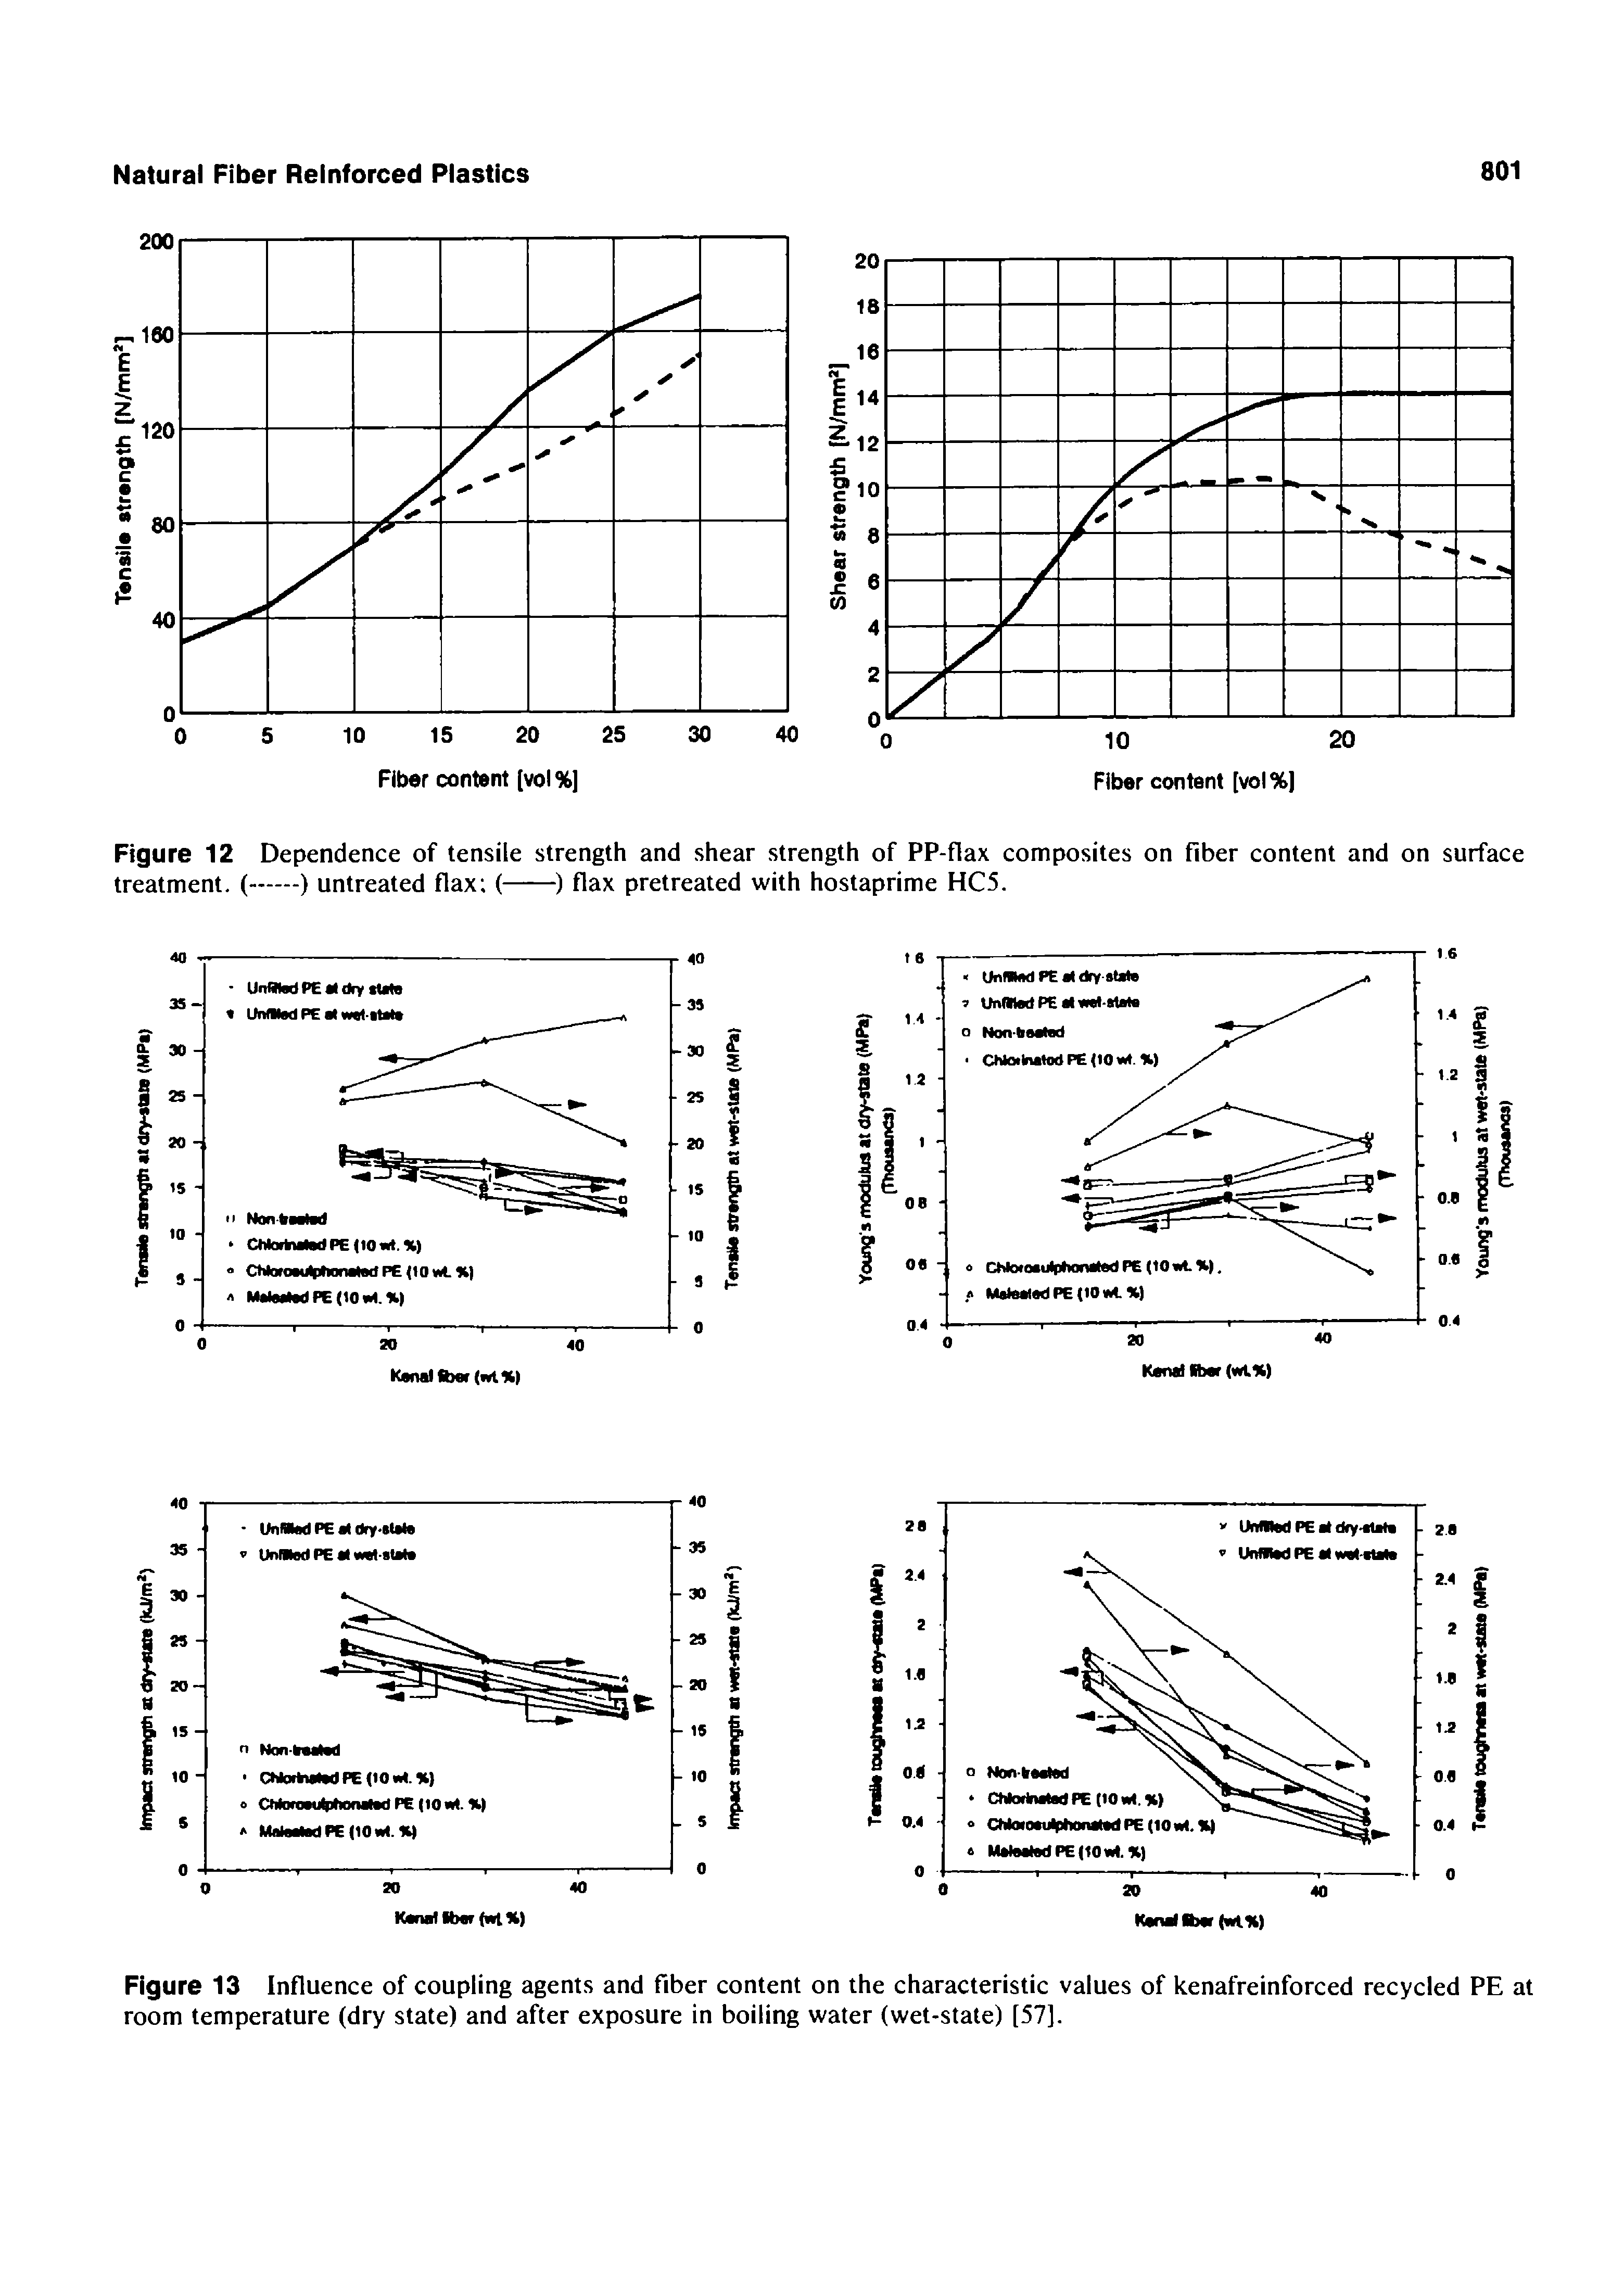 Figure 13 Influence of coupling agents and fiber content on the characteristic values of kenafreinforced recycled PE at room temperature (dry state) and after exposure in boiling water (wet-state) [57].